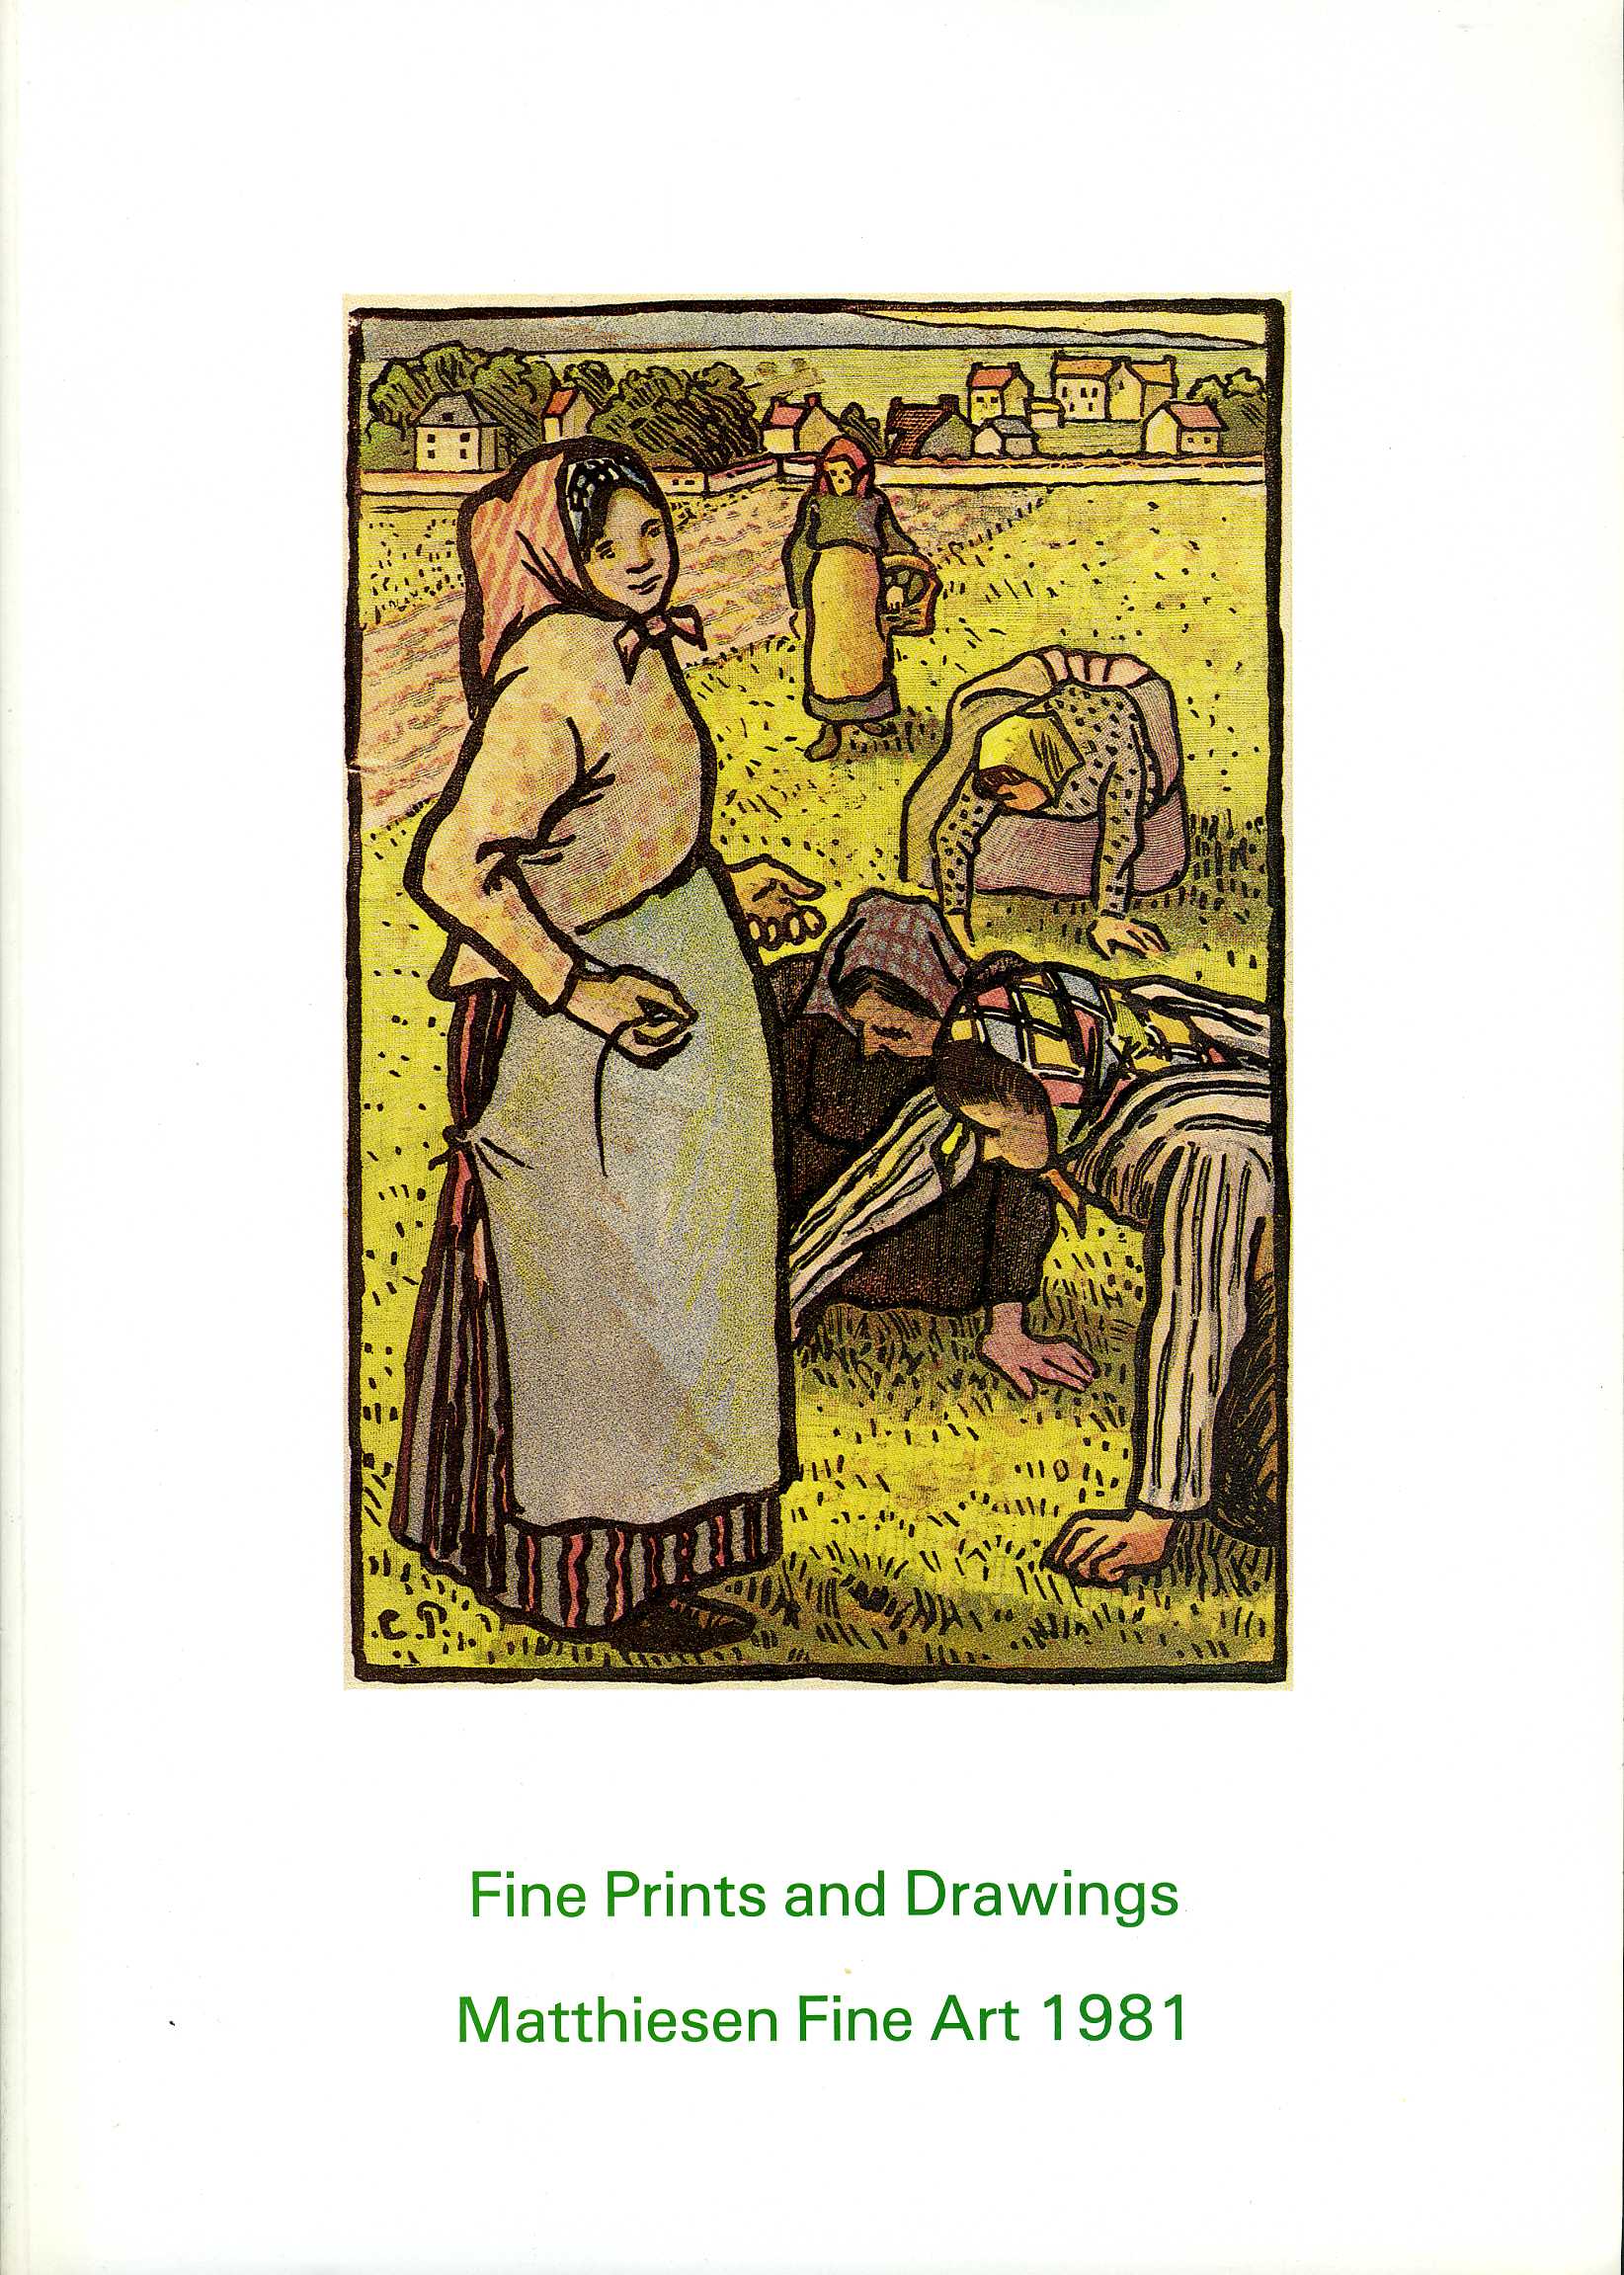 1981-Fine Prints and Drawings: England, America and Europe.